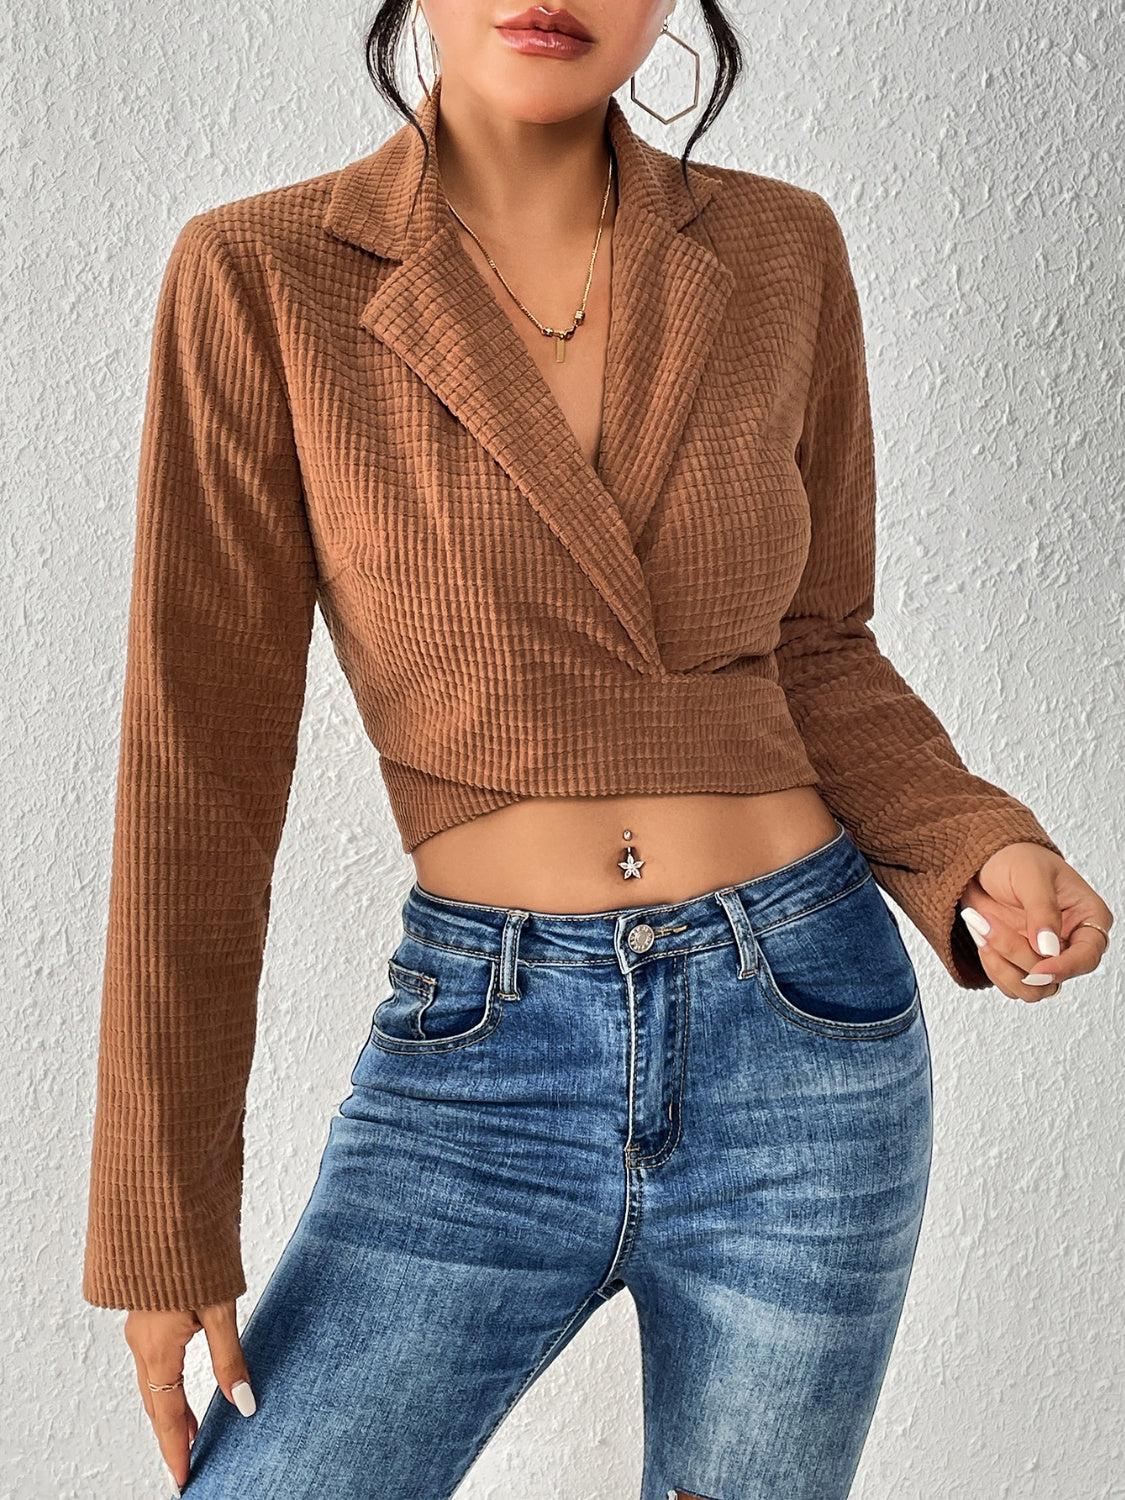 a woman wearing a brown top and jeans